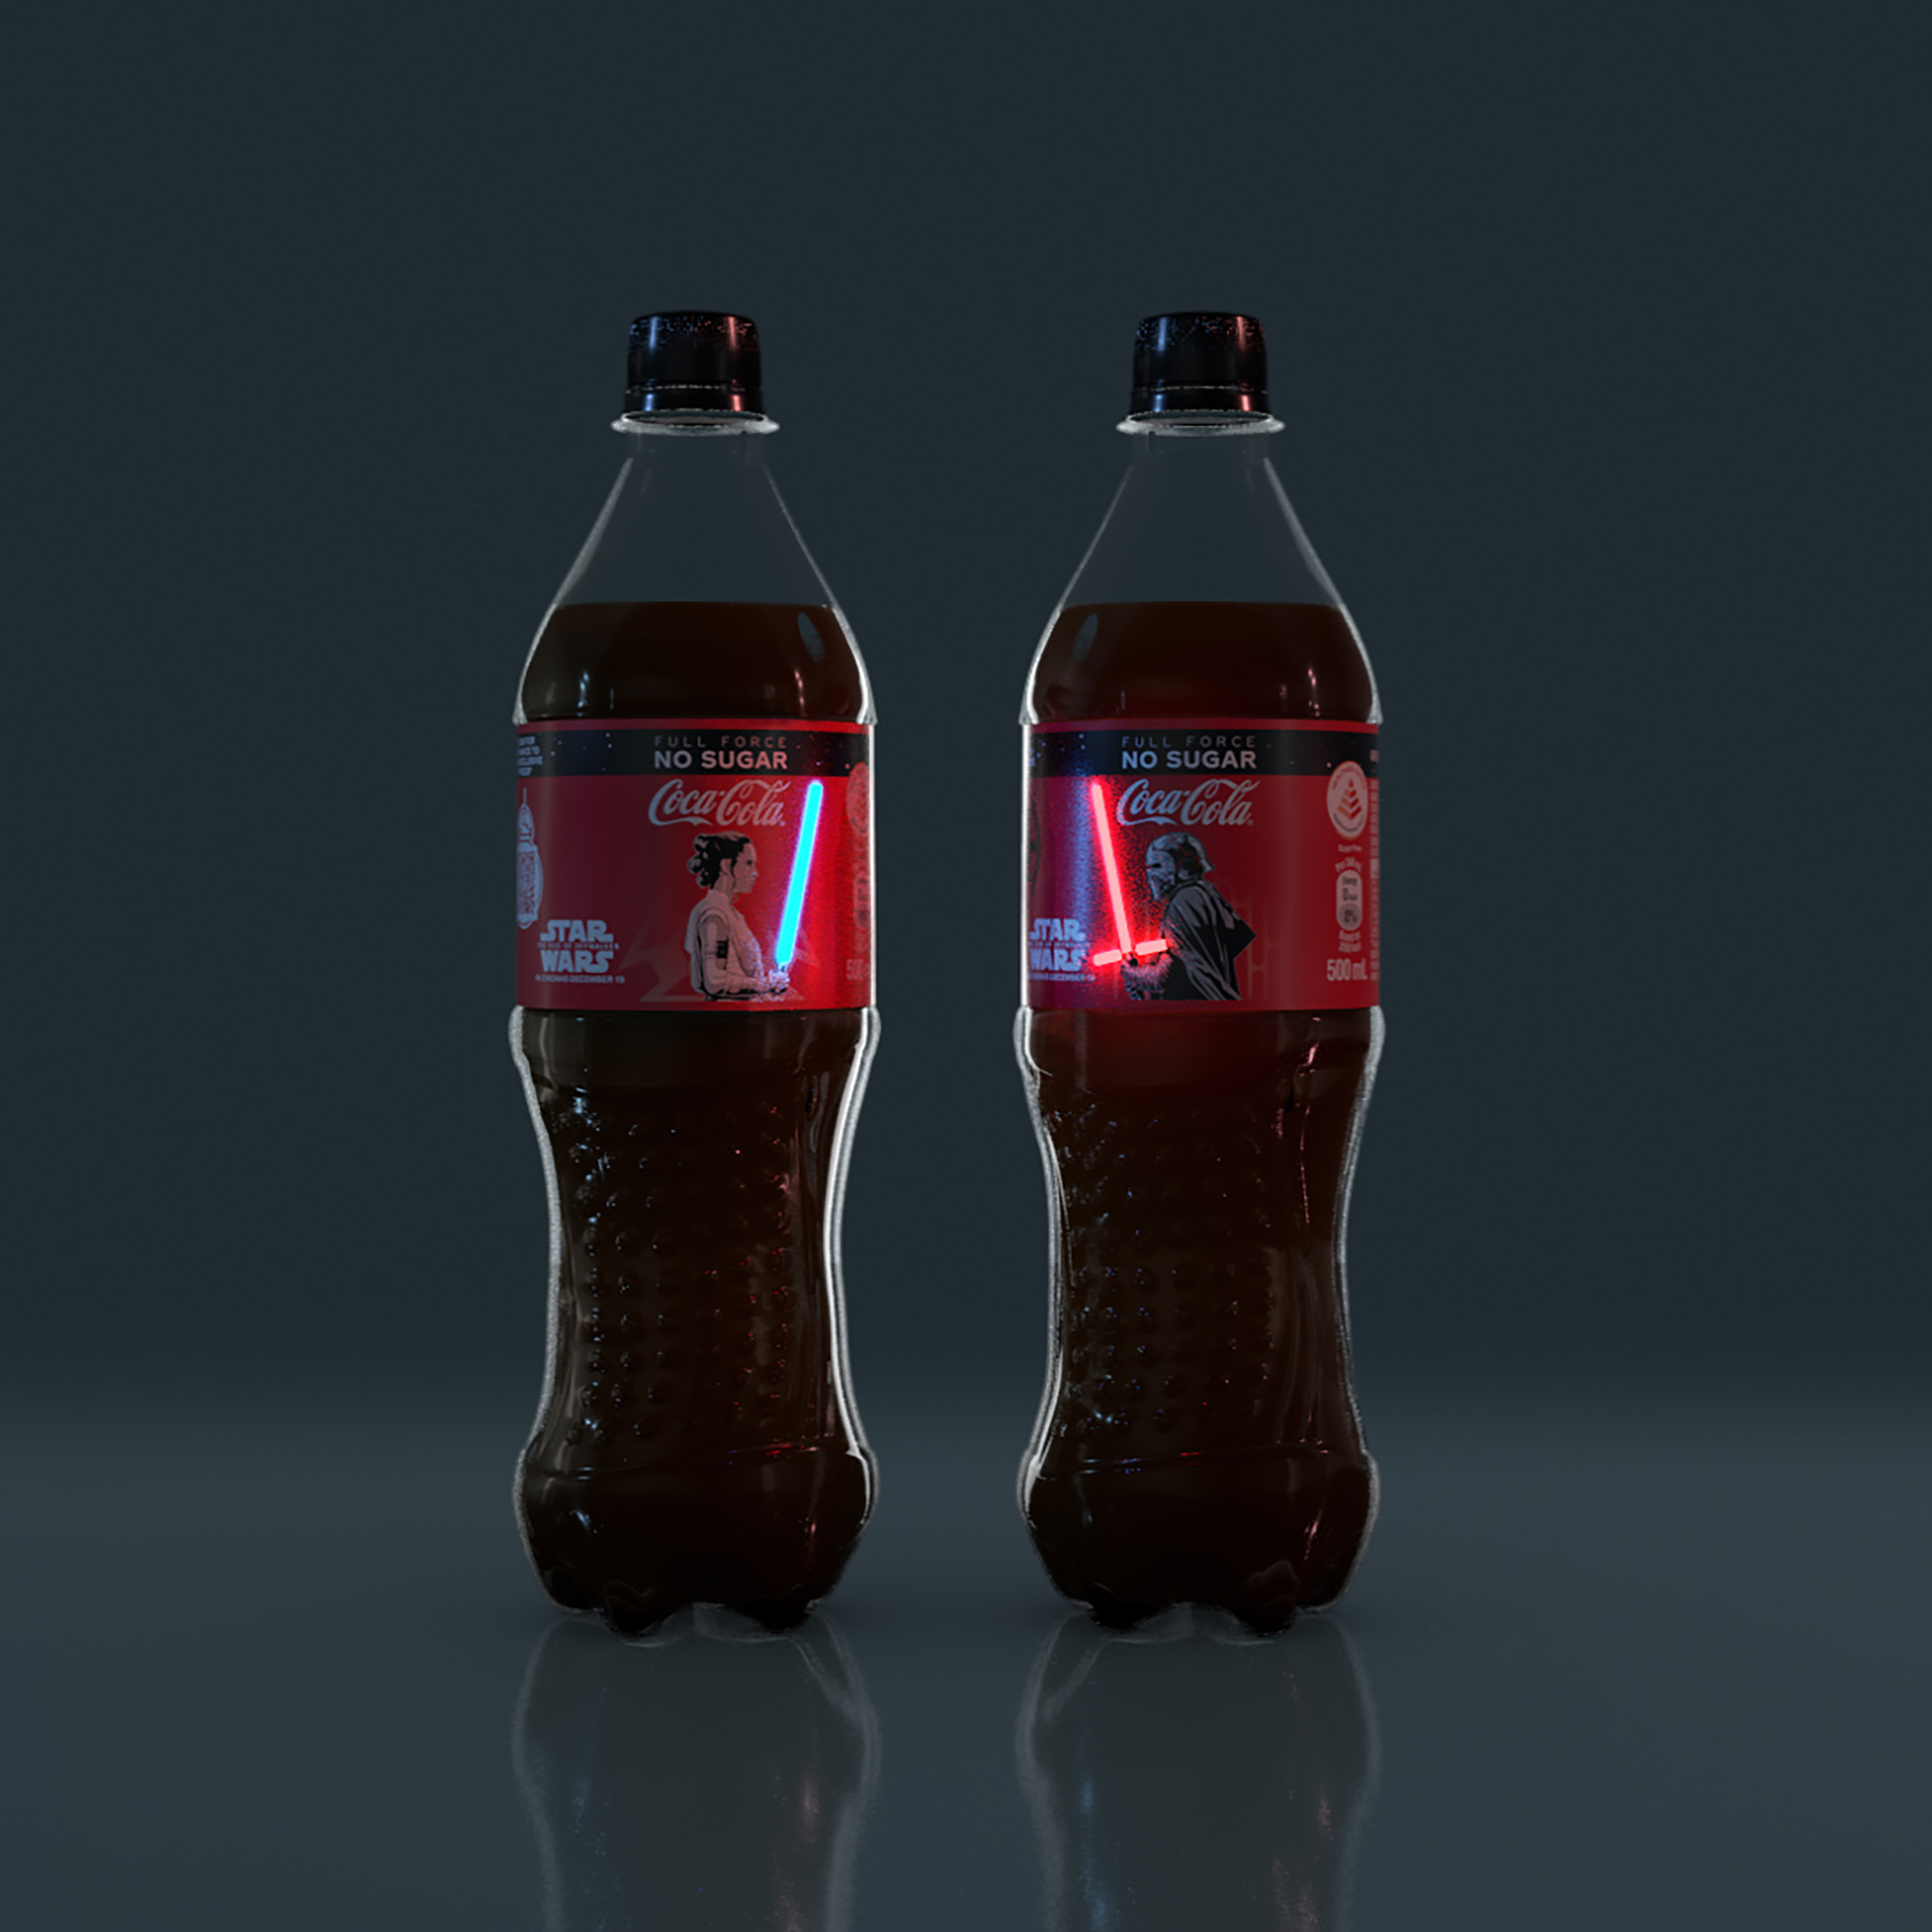 Limited Coca-Cola bottles with glowing shrink-sleeve labels with Rey and Kylo Ren